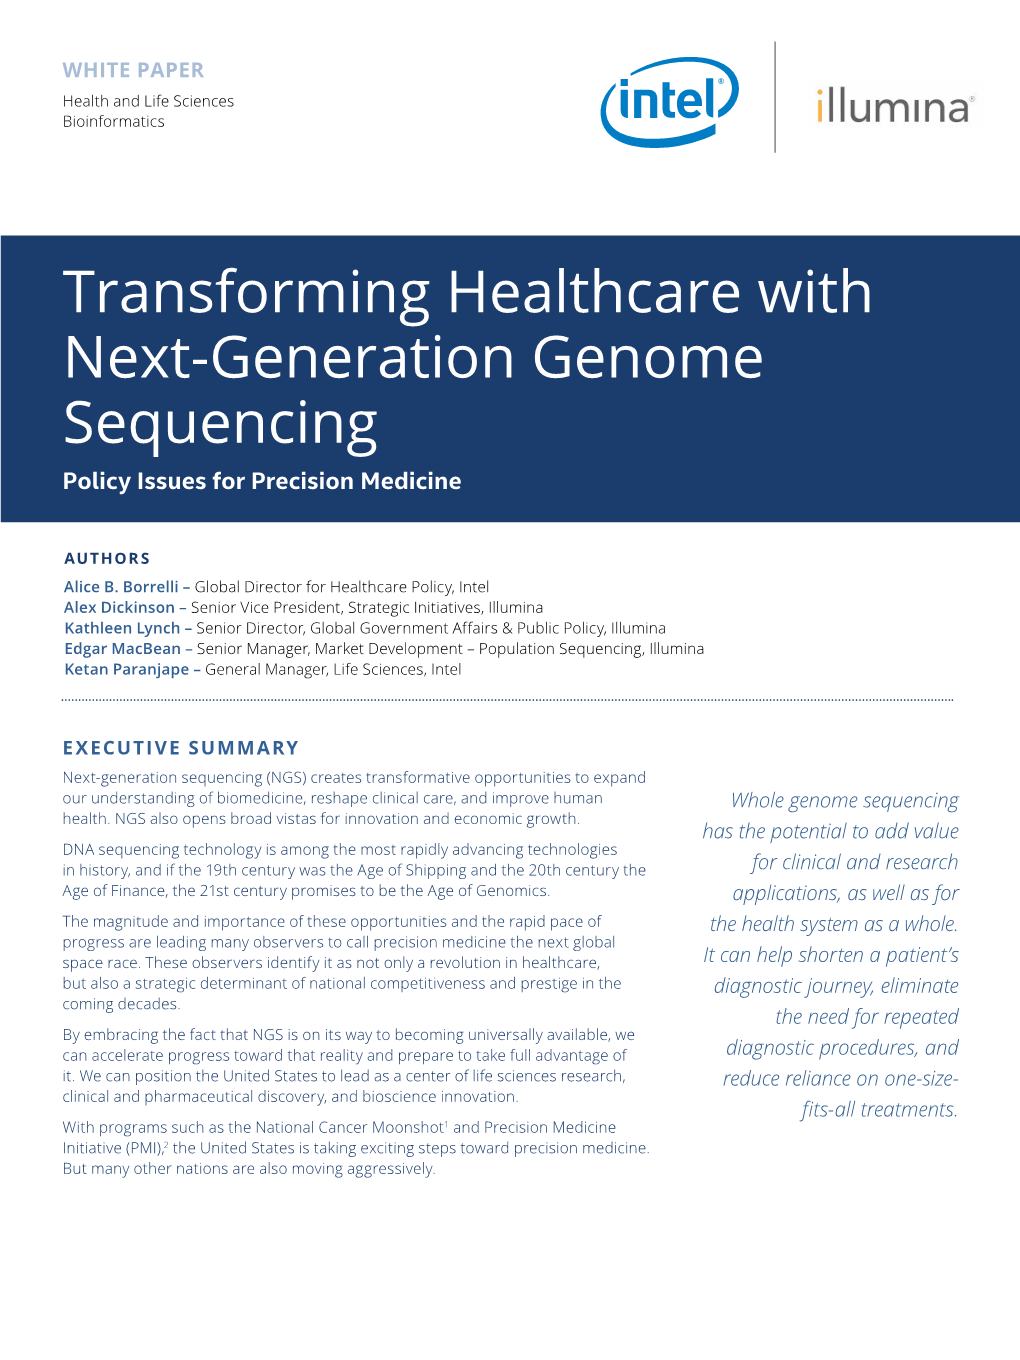 Transforming Healthcare with Next-Generation Genome Sequencing Policy Issues for Precision Medicine